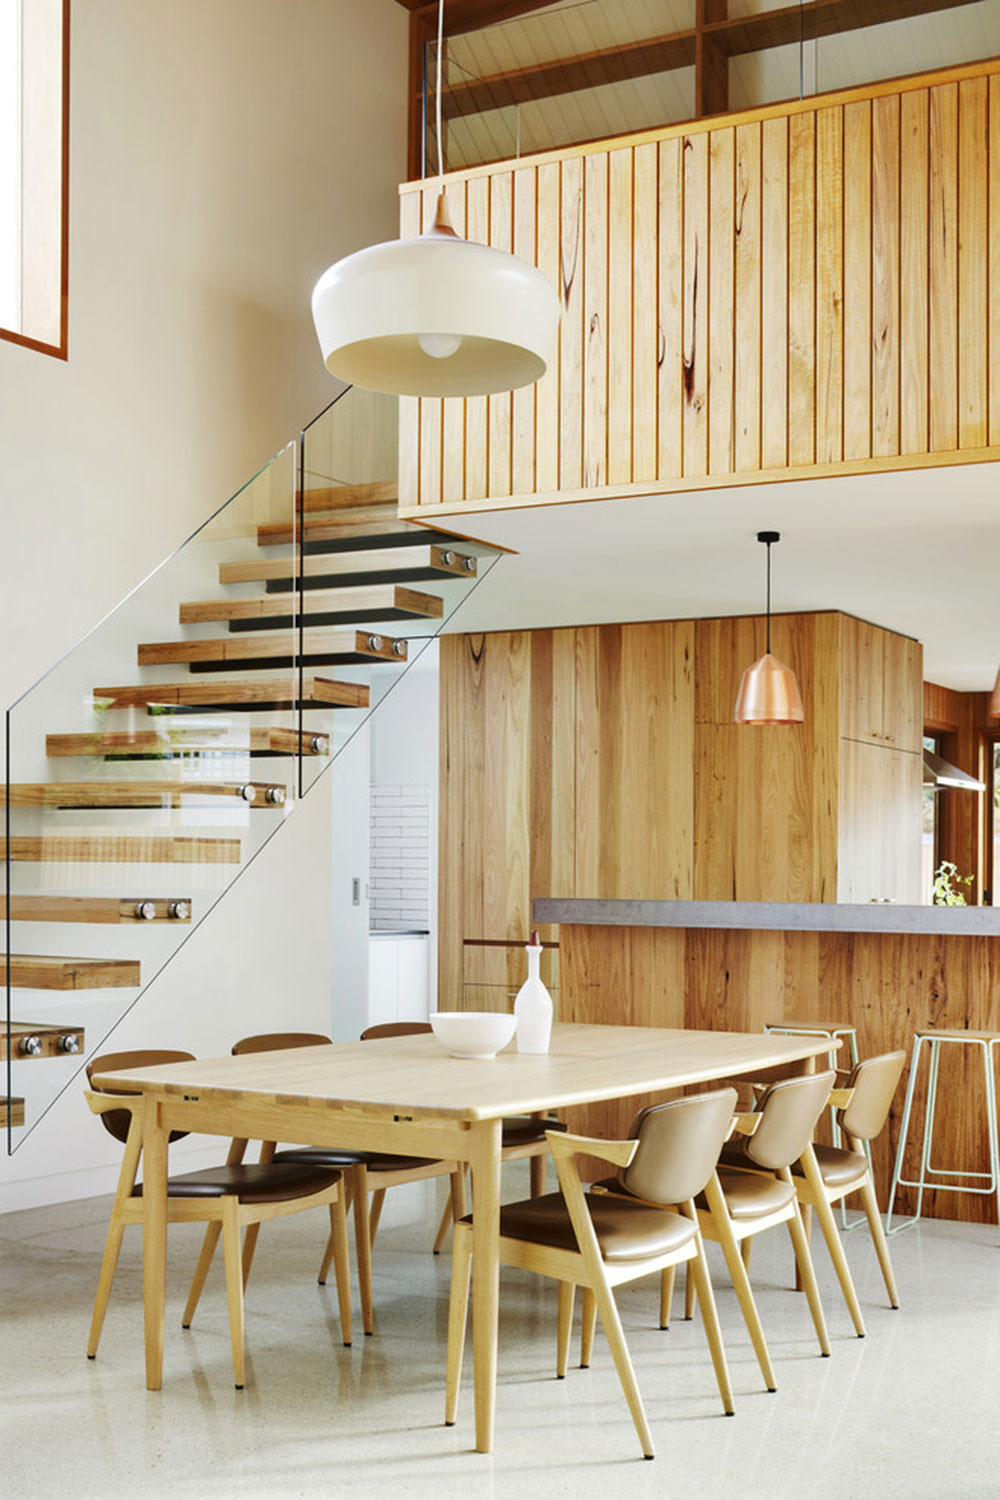 Modern-And-Exquisite-Floating-Staircase11 Modern And Exquisite Floating Staircase Designs